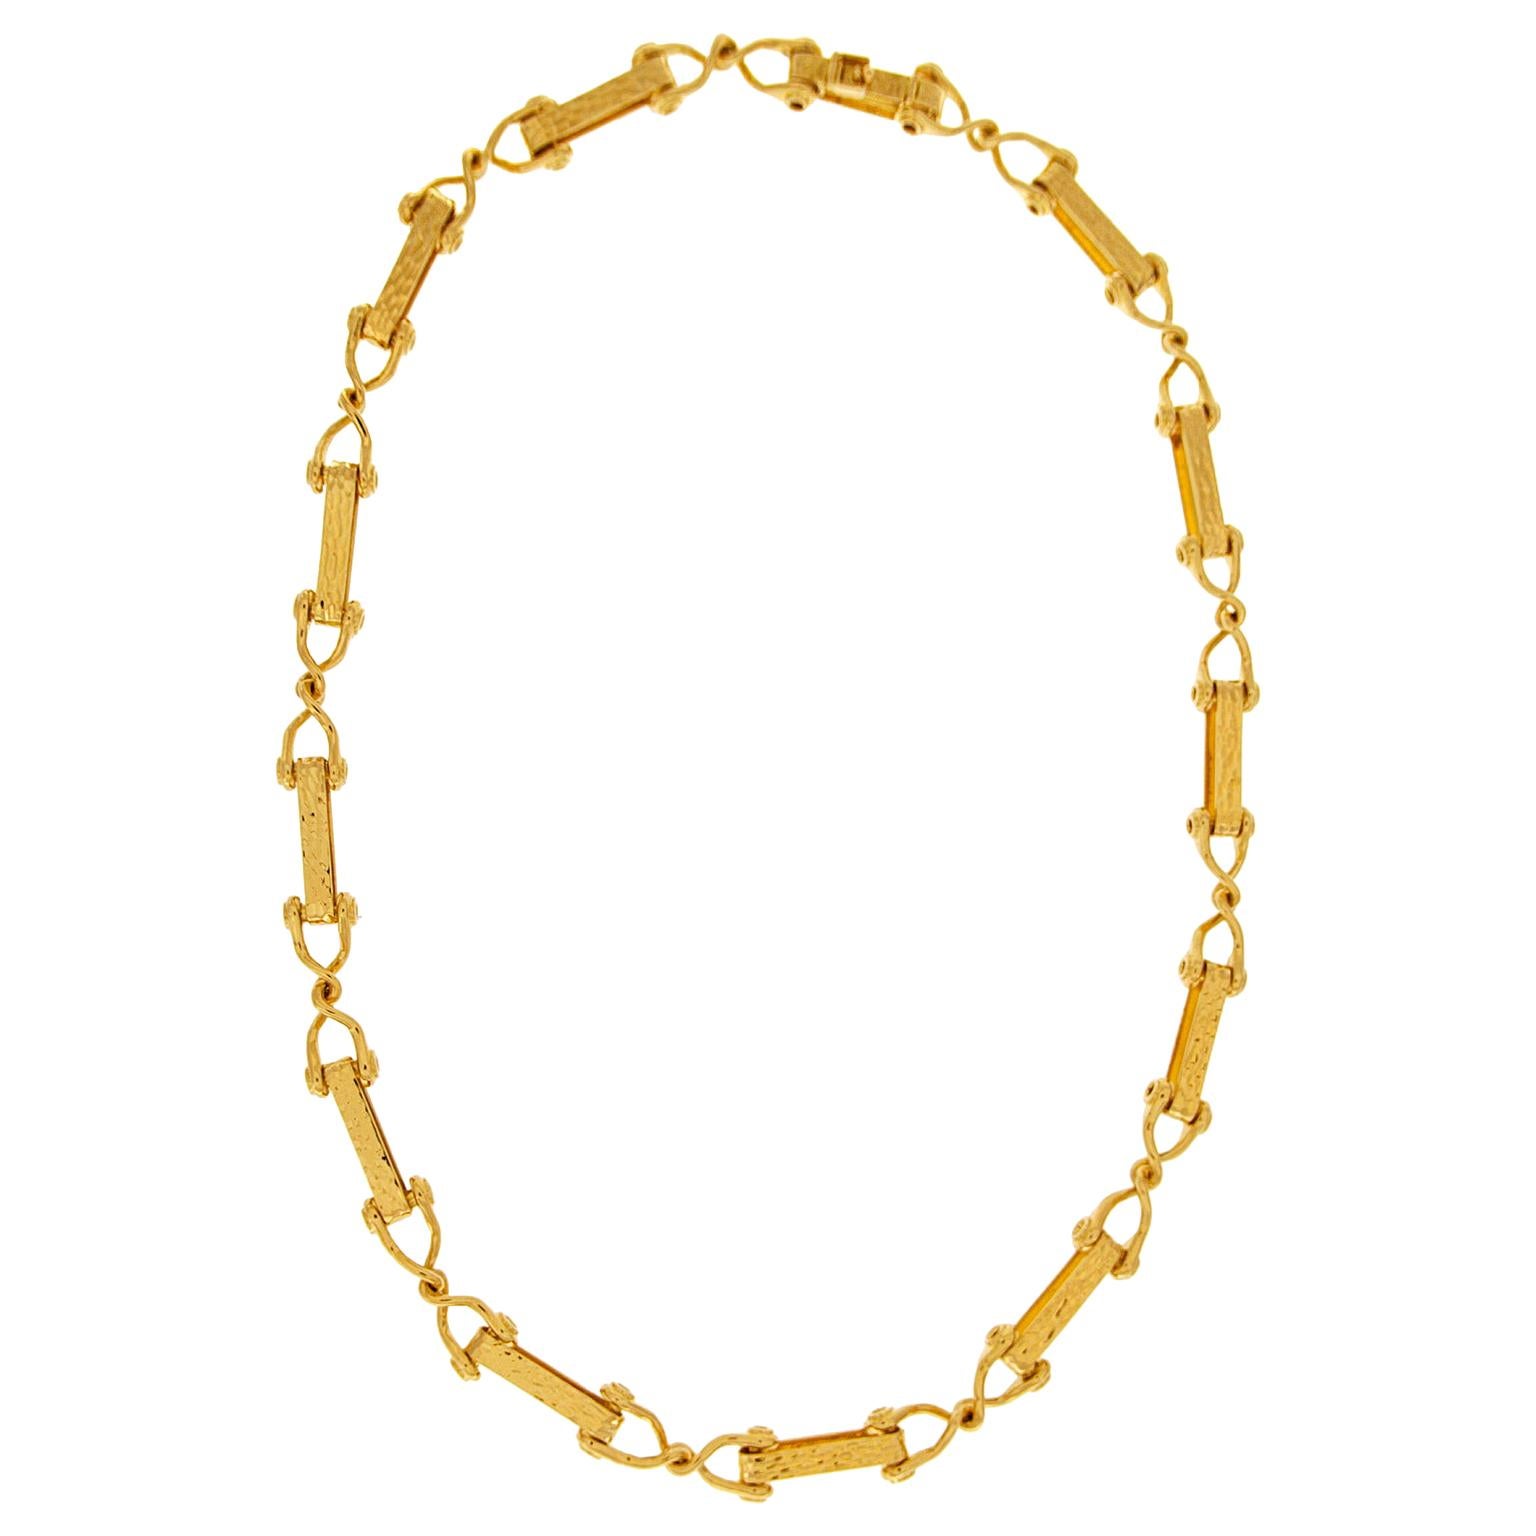 Valentin Magro Cleat Textured Gold Necklace